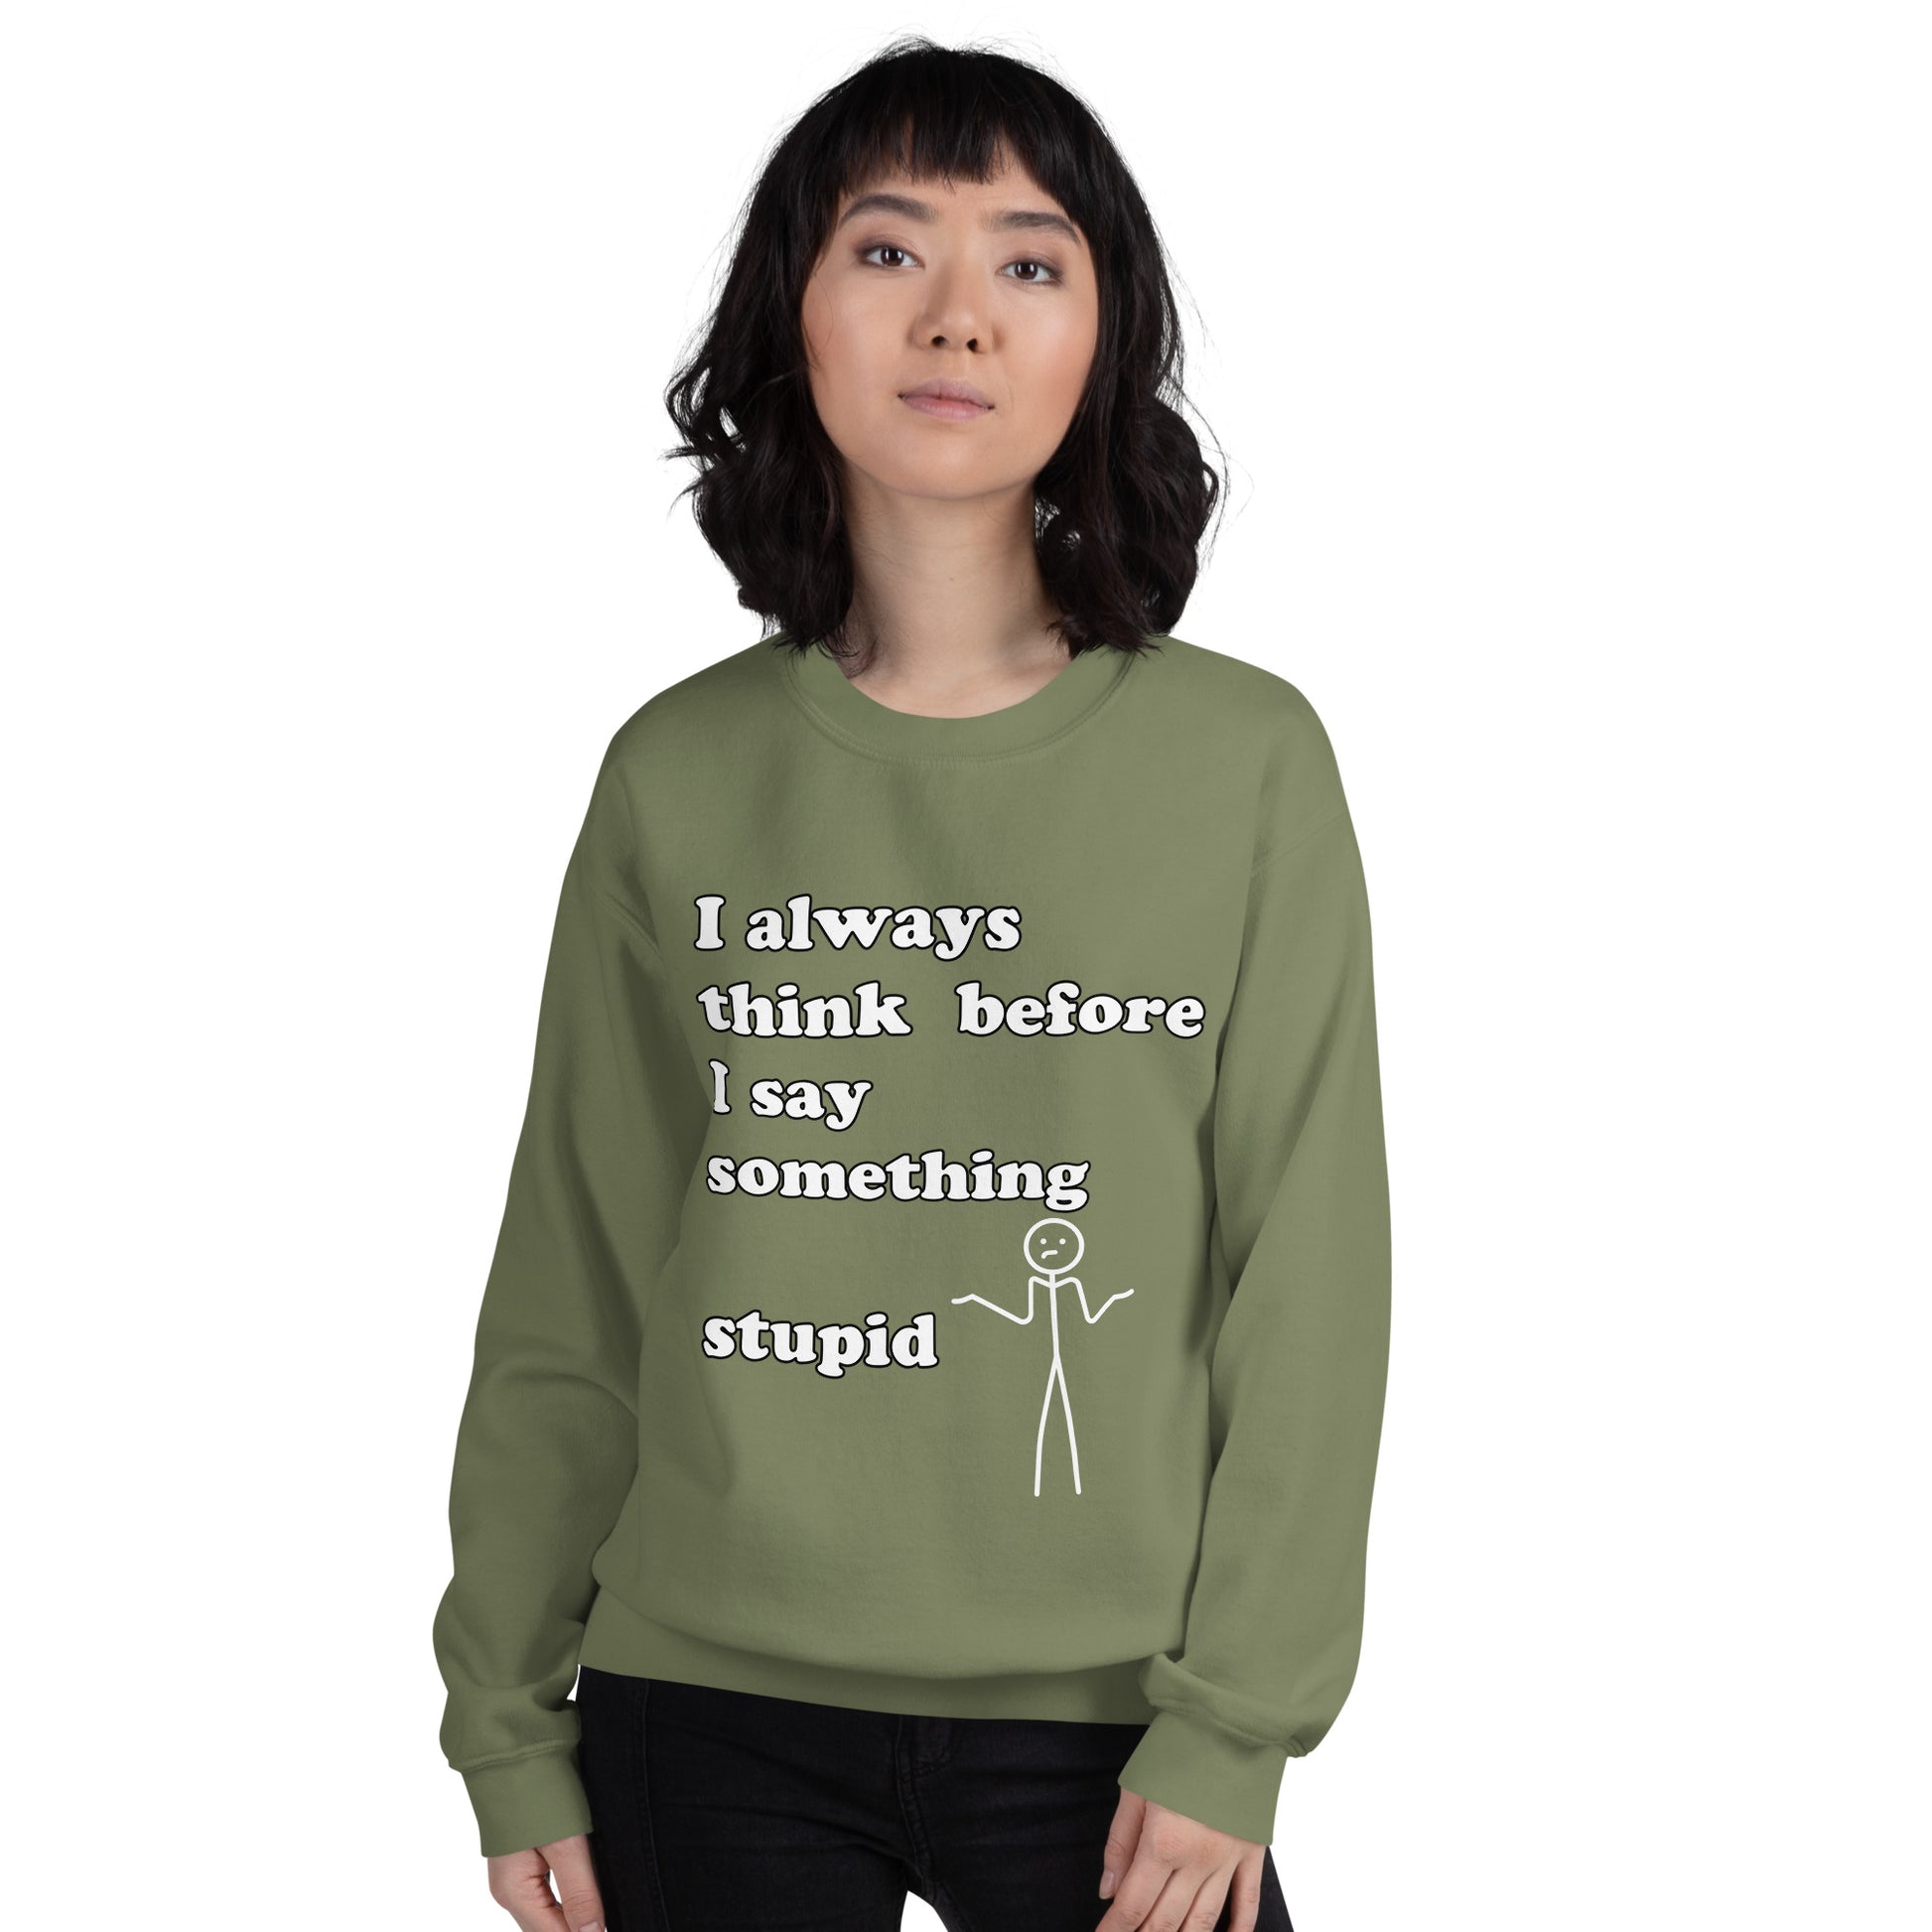 Woman with military green sweatshirt with text "I always think before I say something stupid"